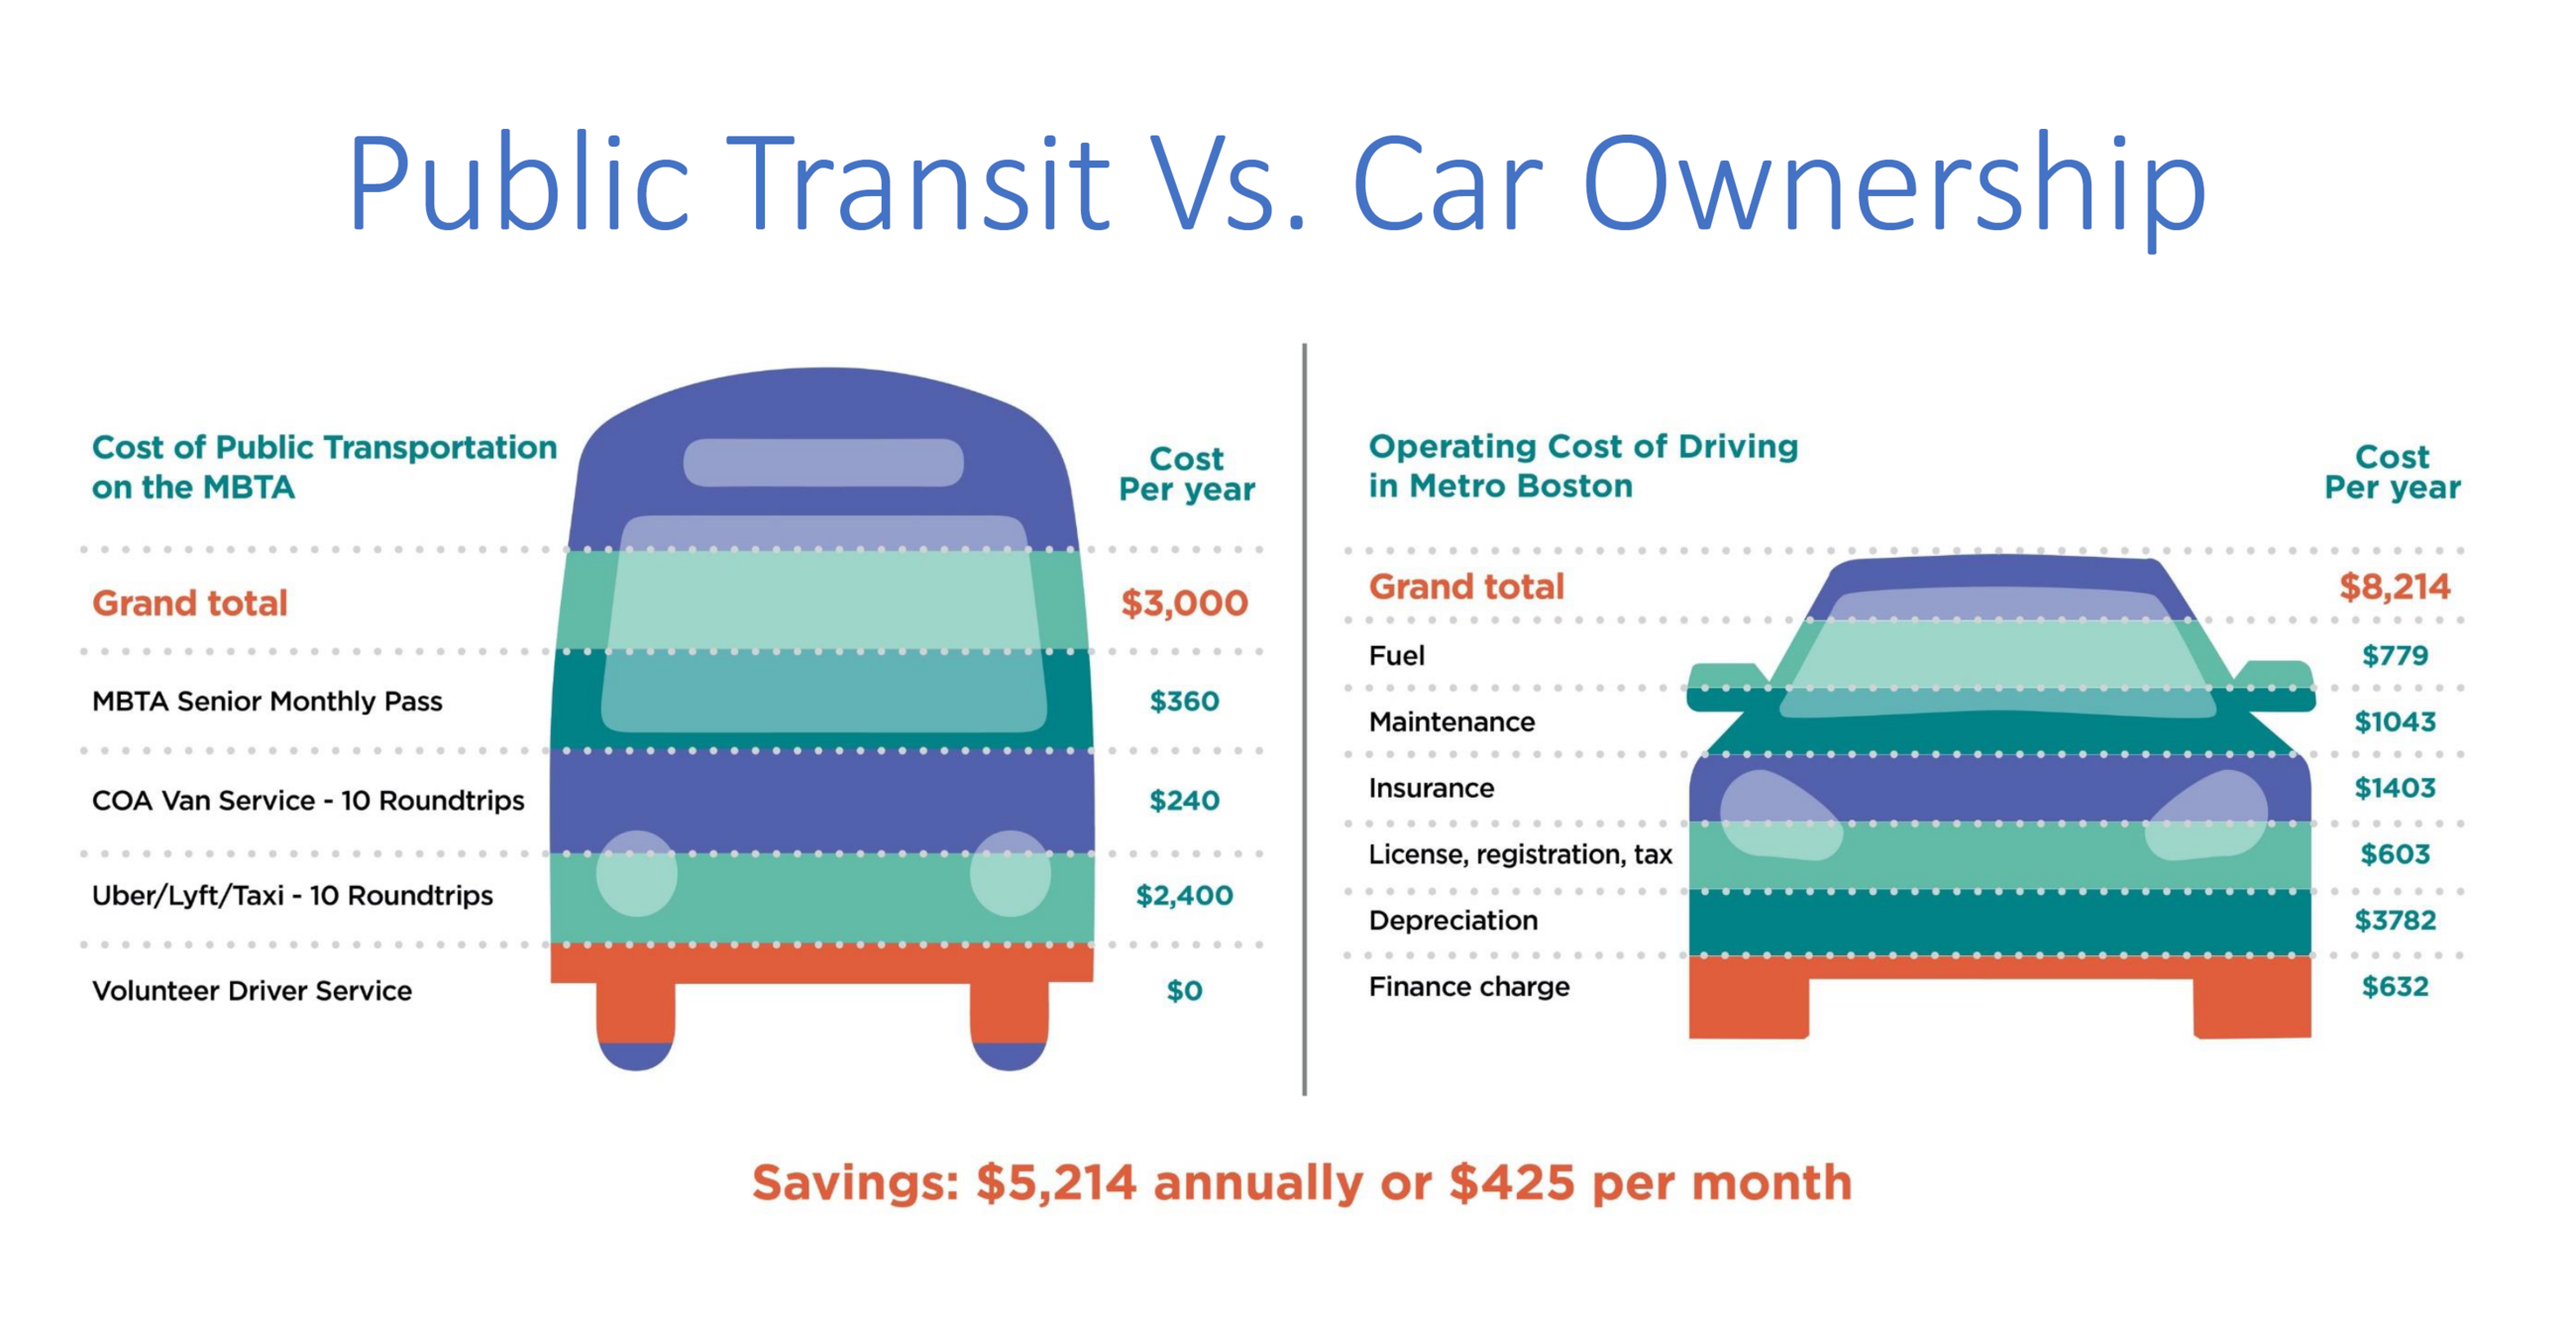 Graphic titled features a bus in left column and a car in right column. Public Transit includes cost of public transit on the T ($3,000 per year) includes MBTA senior monthly pass, COA van service (10 roundtrips), Uber/Lyft/taxi (10 roundtrips) and volunteer driver service. Operating cost of driving in metro Boston ($8,214 per year) includes fuel, maintenance, insurance, license, registration, tax, depreciation, and finance charges. Savings of $5,214 annually, or $425 per month.